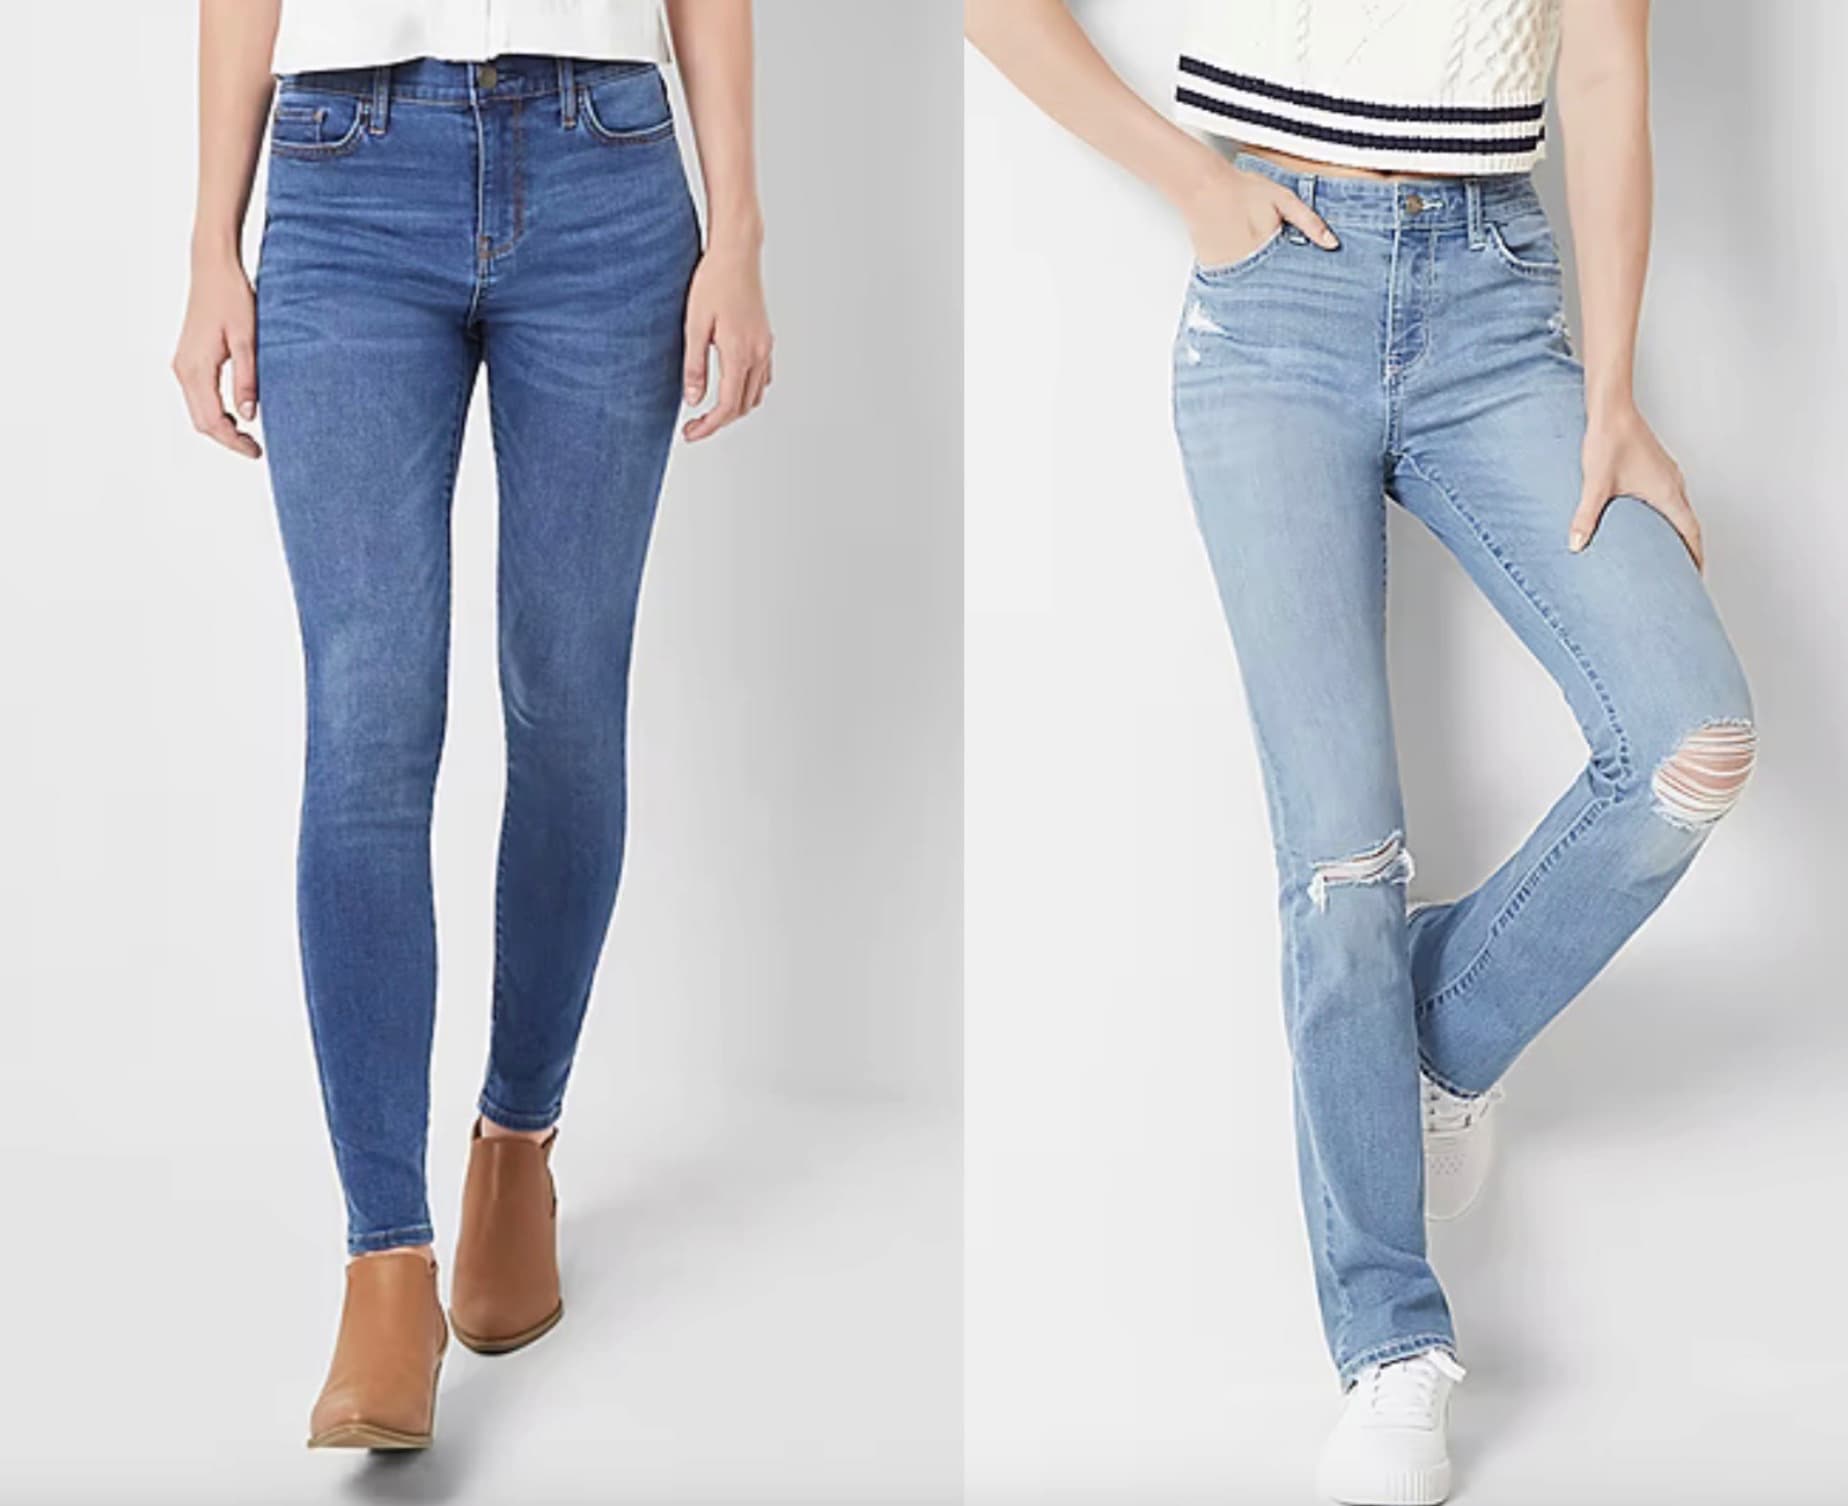 Ladies’s Denims as little as $14.99 at JCPenney!